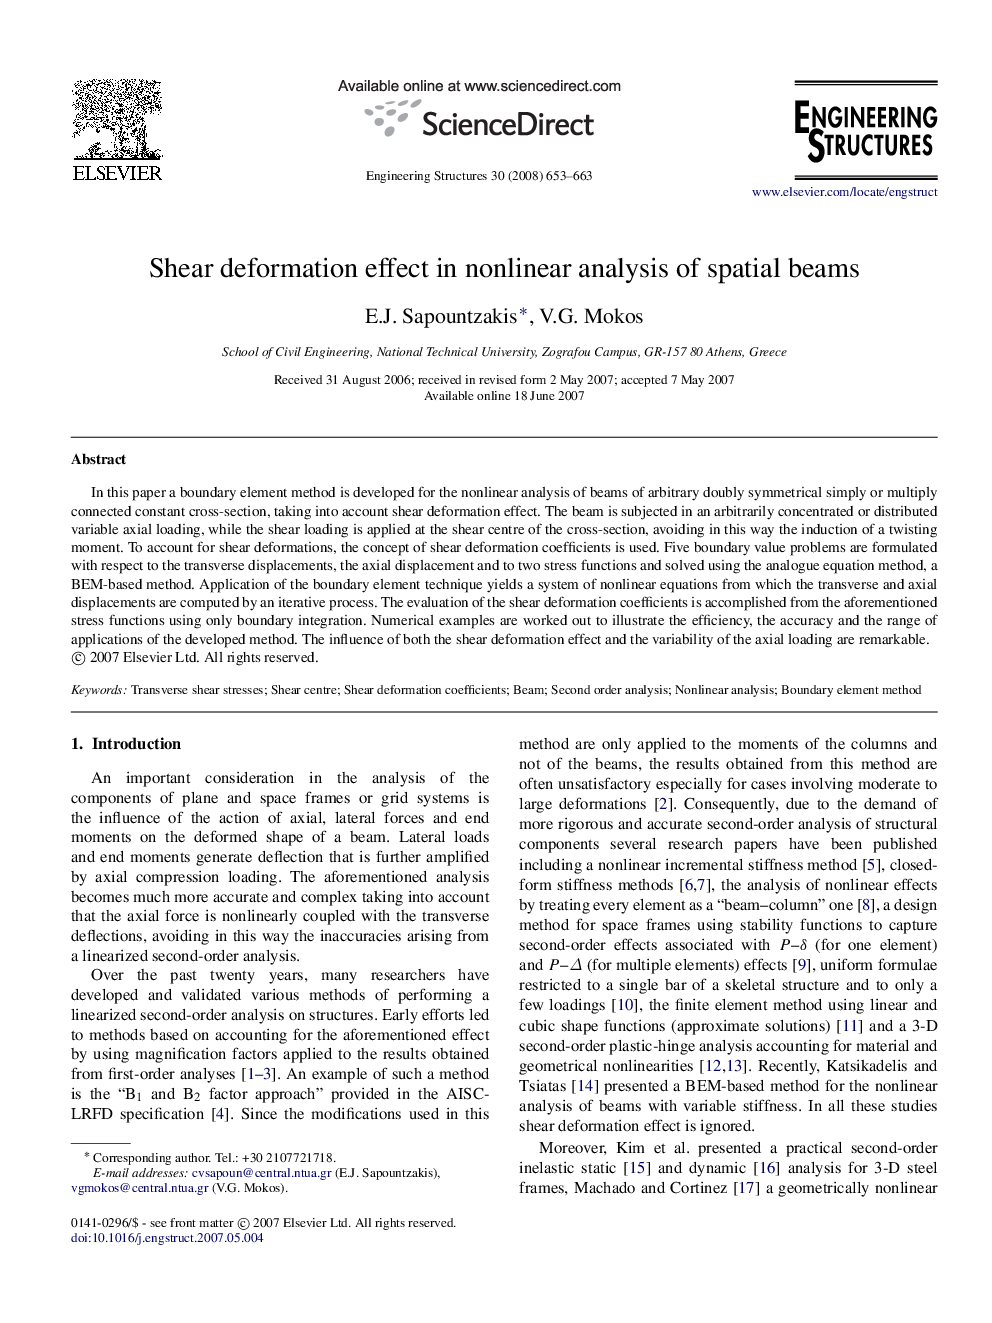 Shear deformation effect in nonlinear analysis of spatial beams